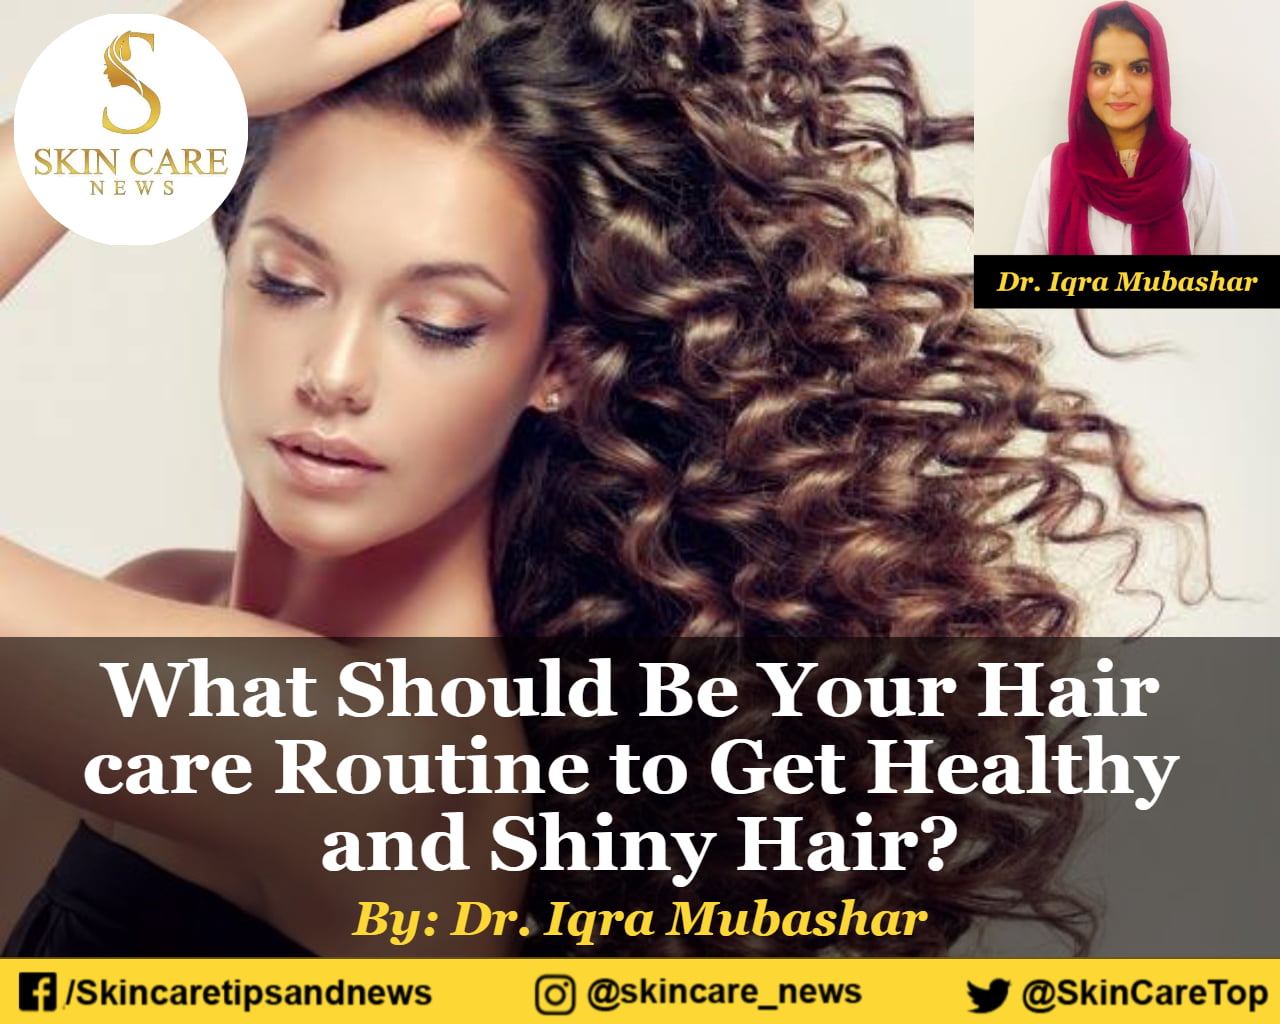 What Should Be Your Hair care Routine to Get Healthy and Shiny Hair?